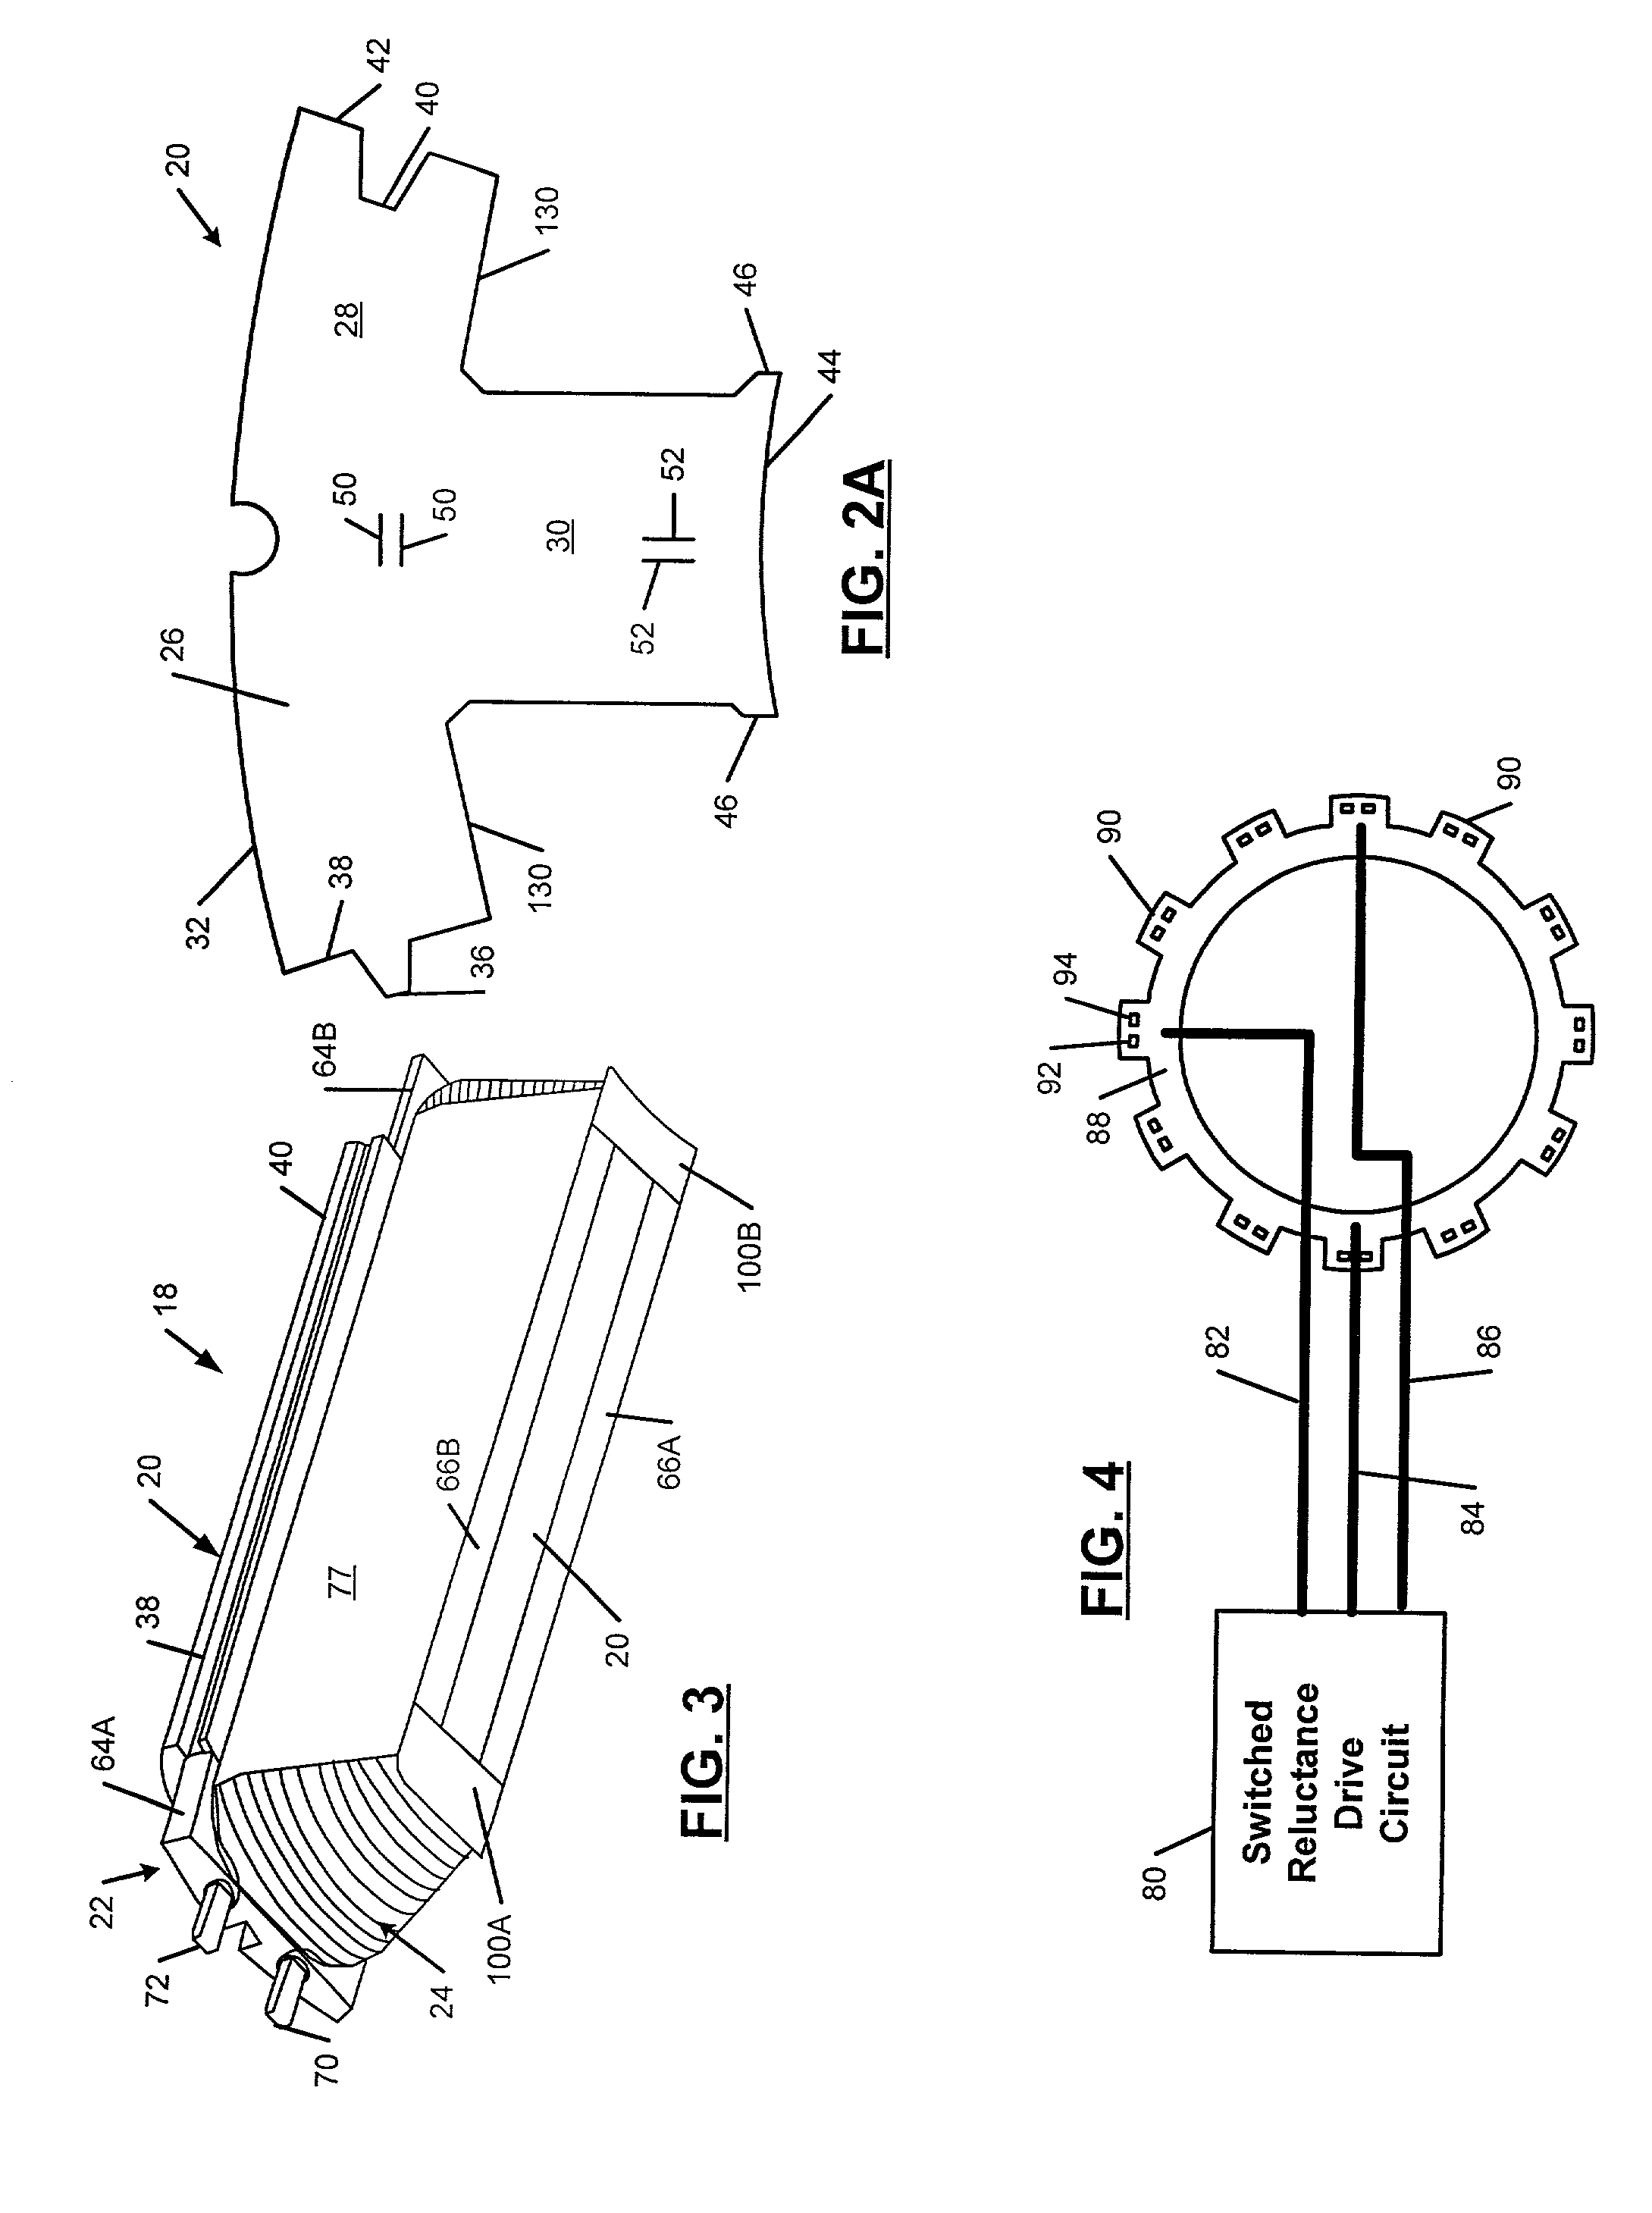 Segmented stator switched reluctance machine